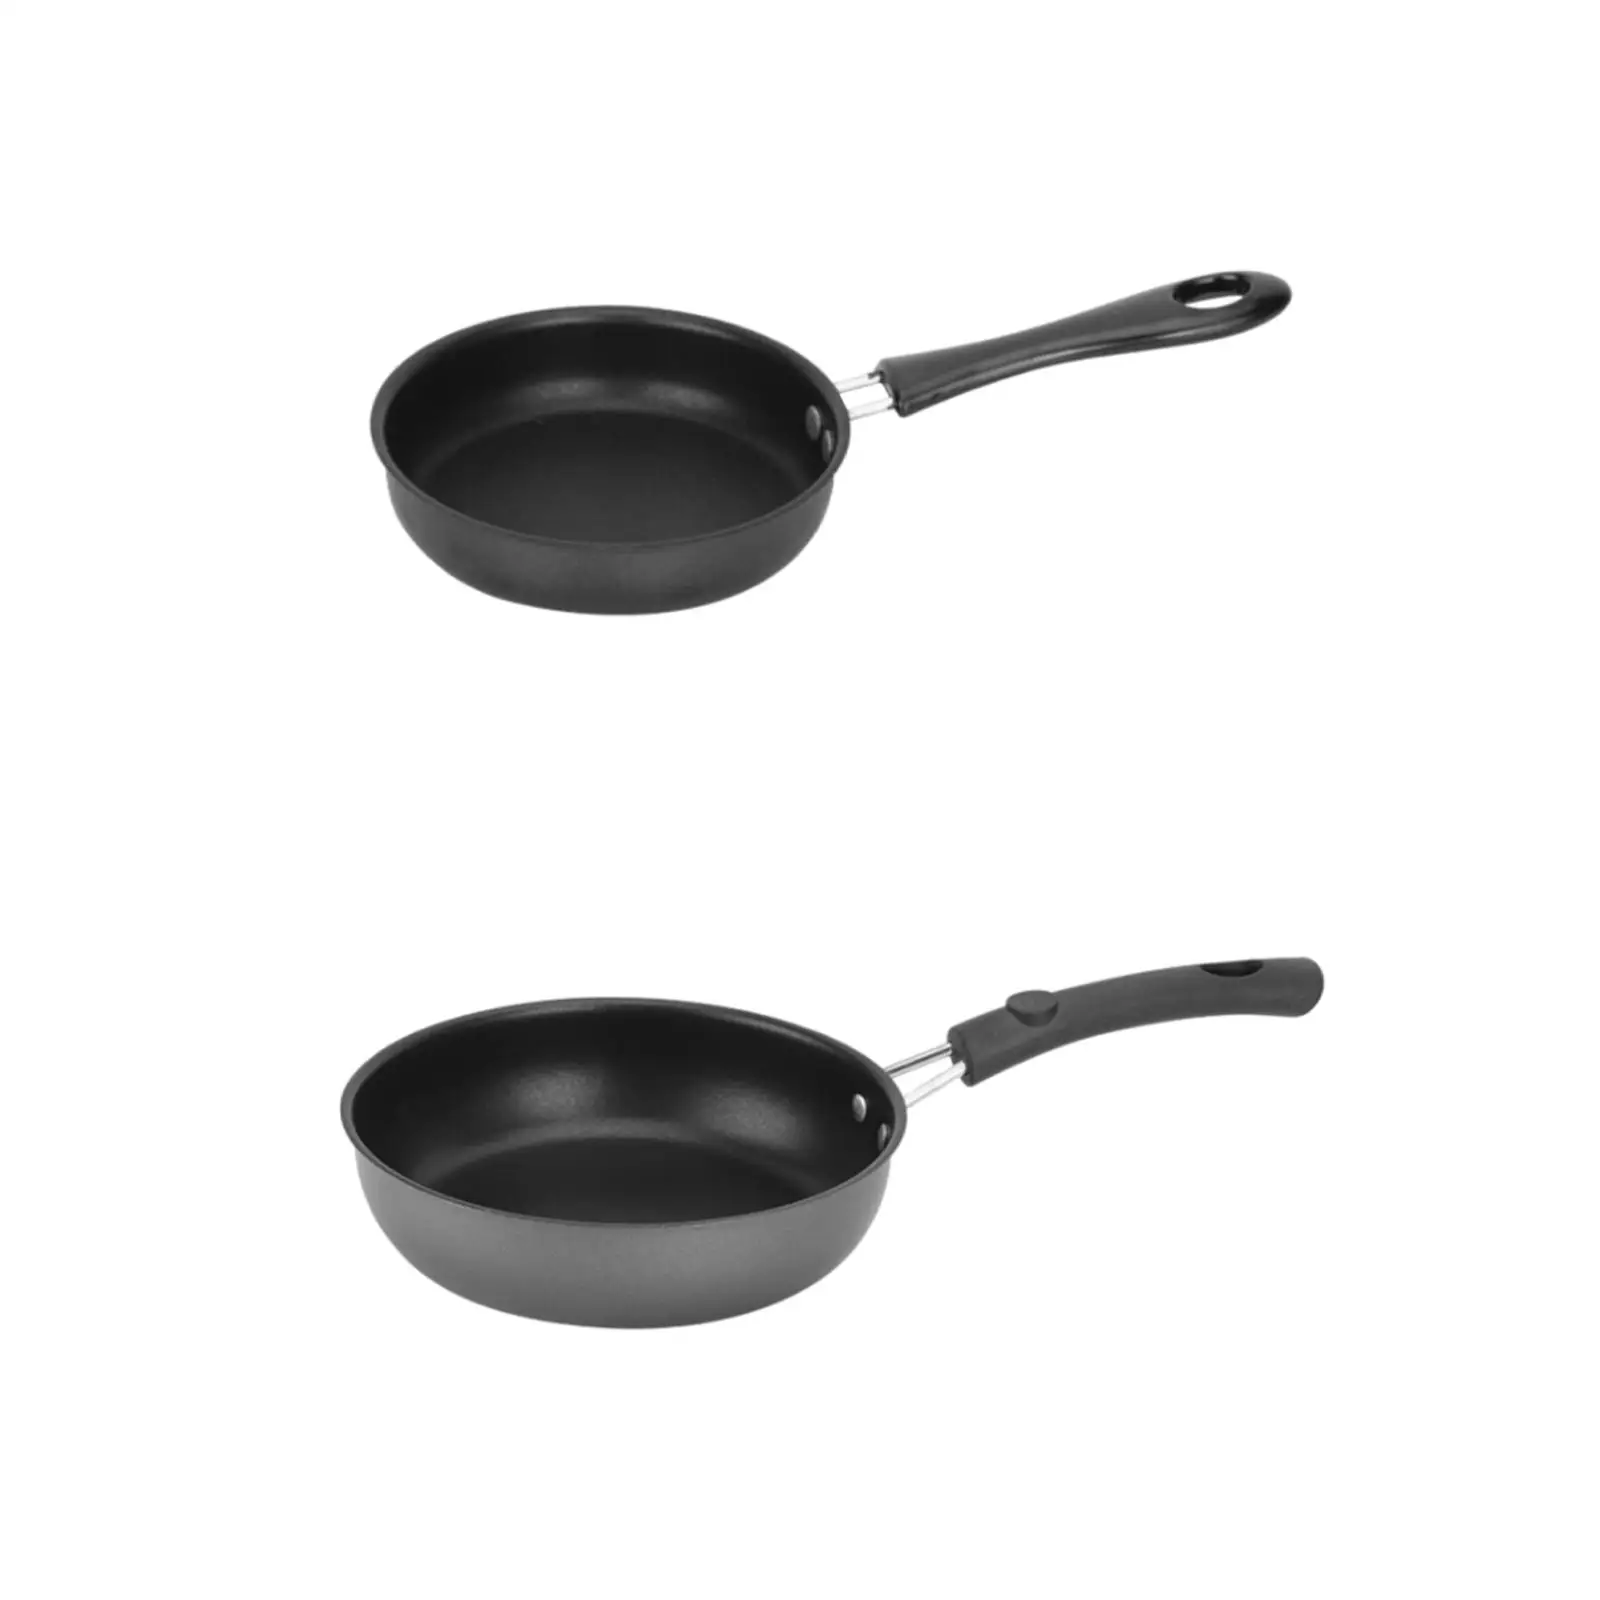 Fry Pan 3 Layer with Long Handle Egg Frying Pan Induction Cooker Kitchen